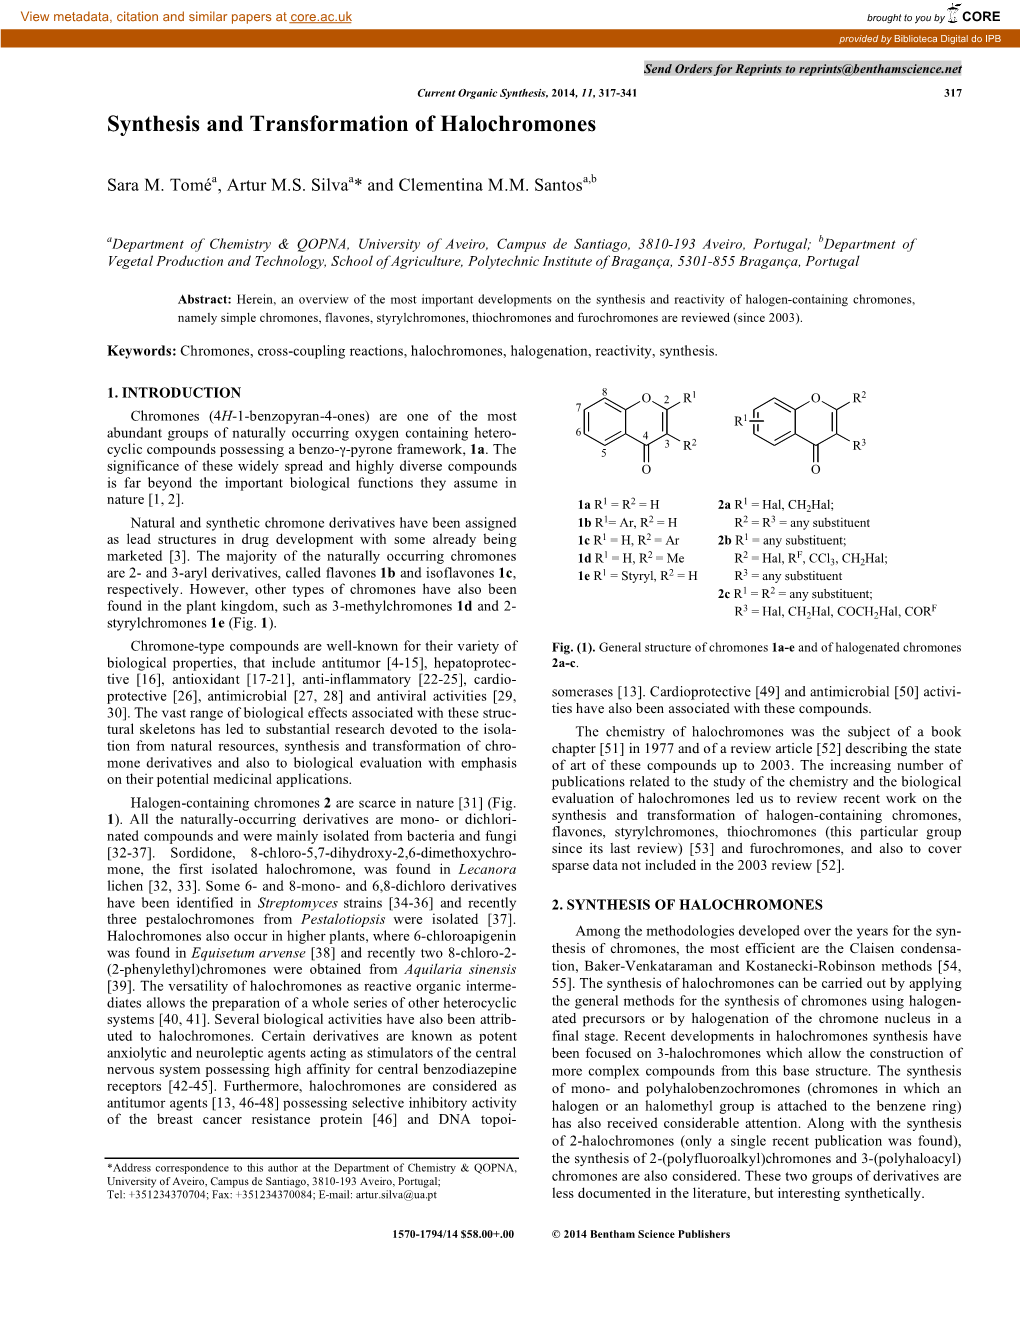 Synthesis and Transformation of Halochromones